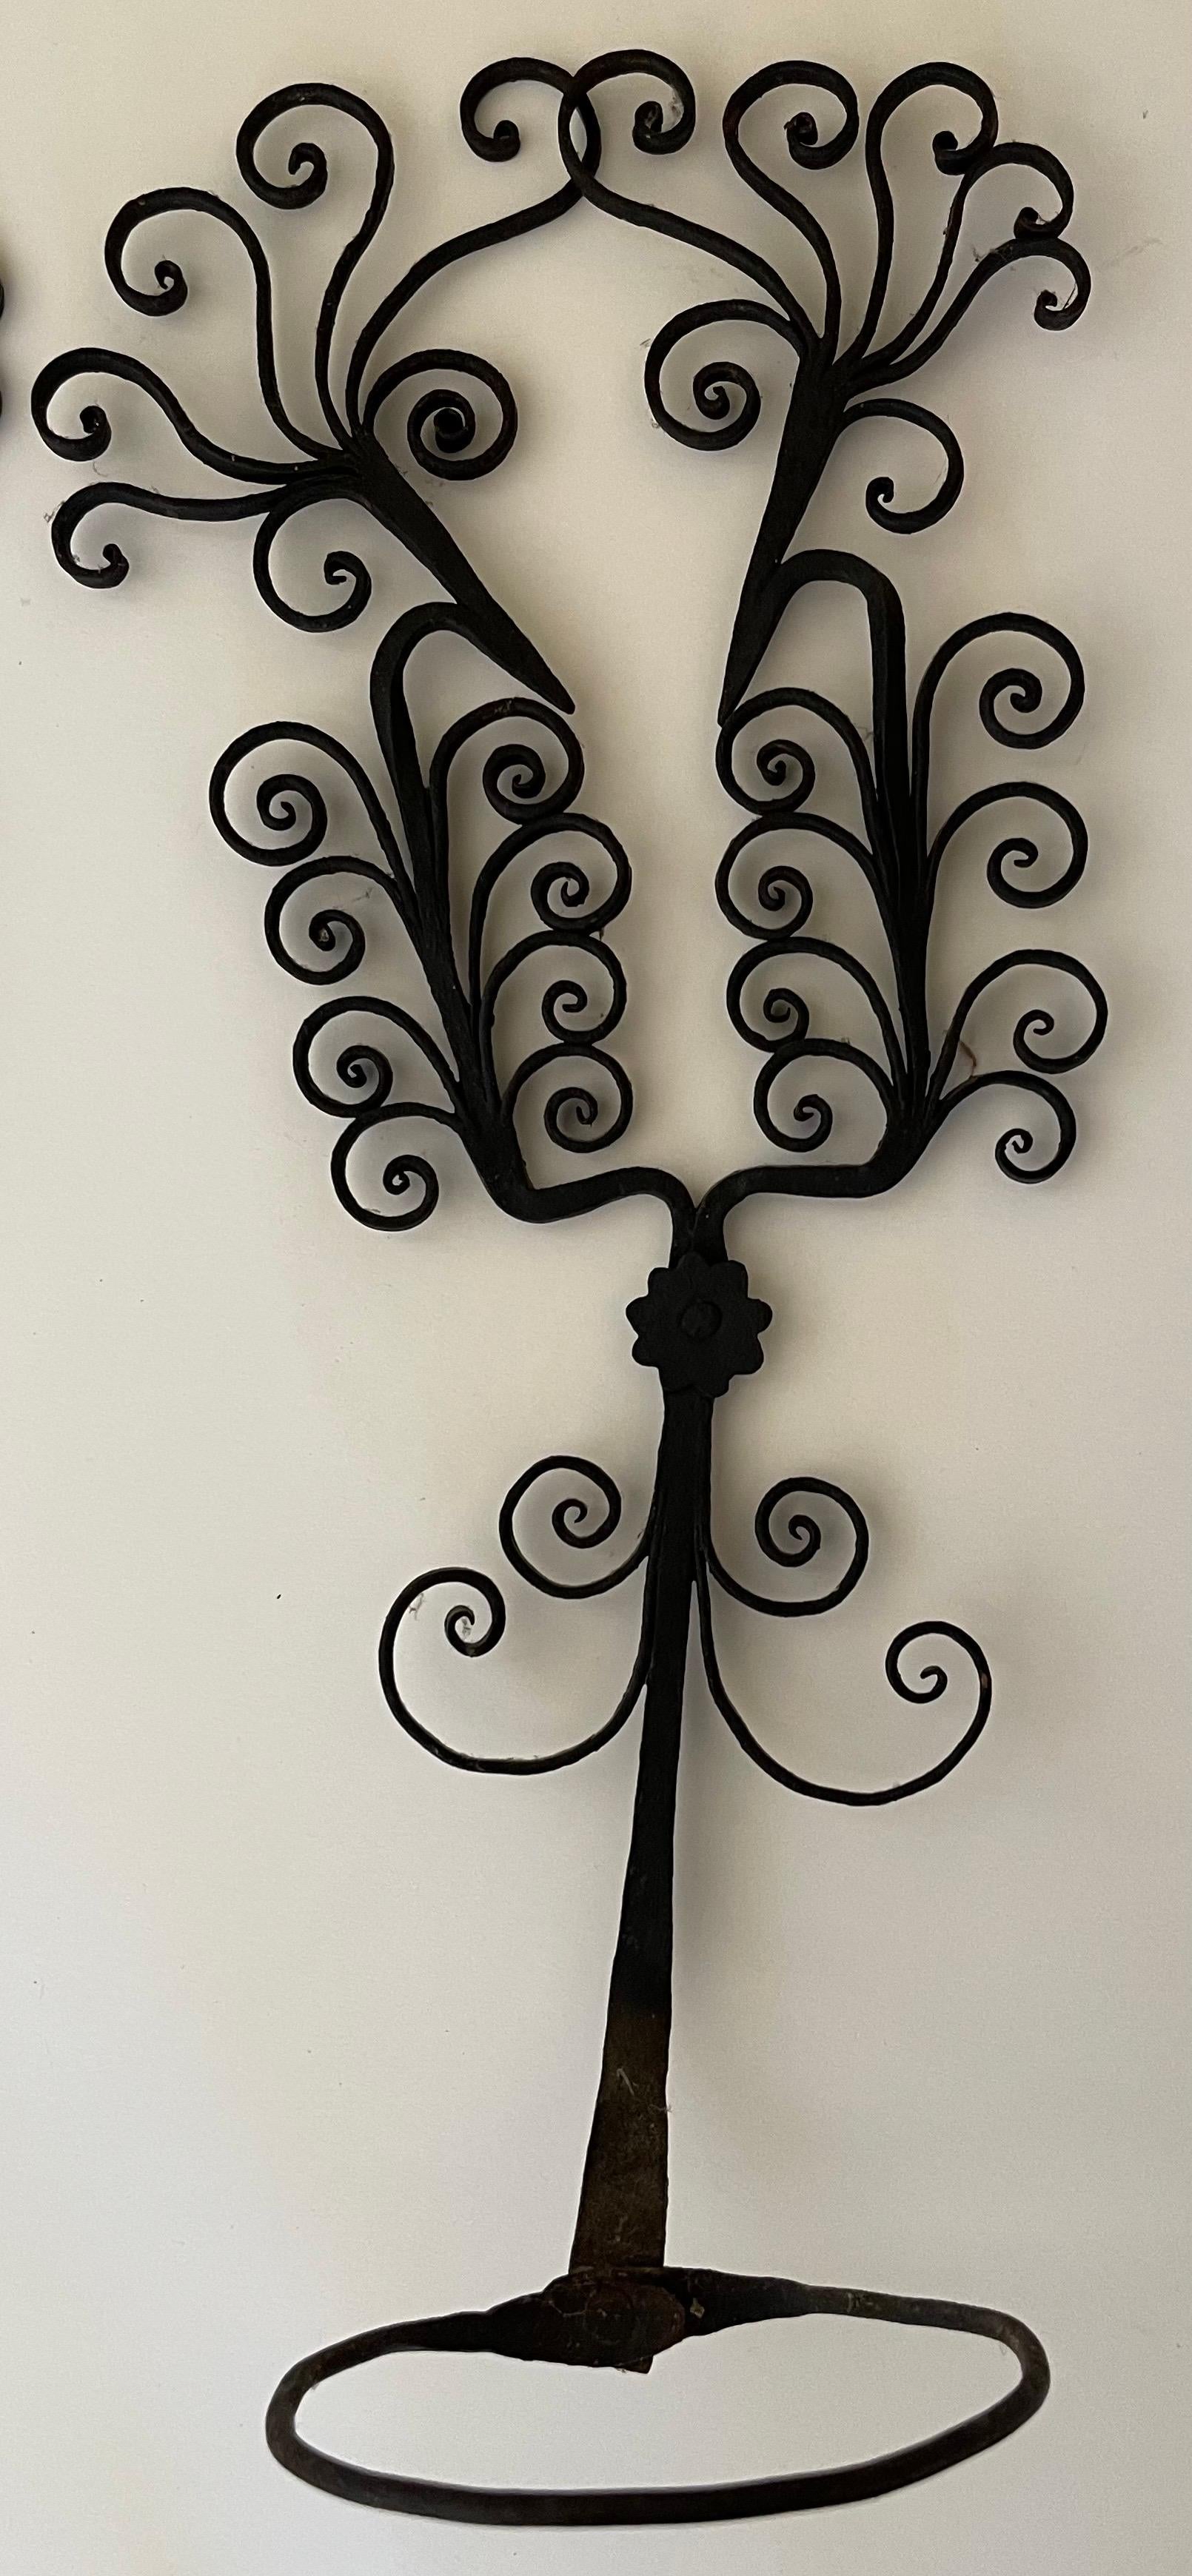 Pair of 1930s French wrought iron scroll motif wall mounted plant holders. Black wrought iron with detailed scrolled design. Each piece is handmade and varies slightly. No makers mark or signature. Hanging hardware is not included. 